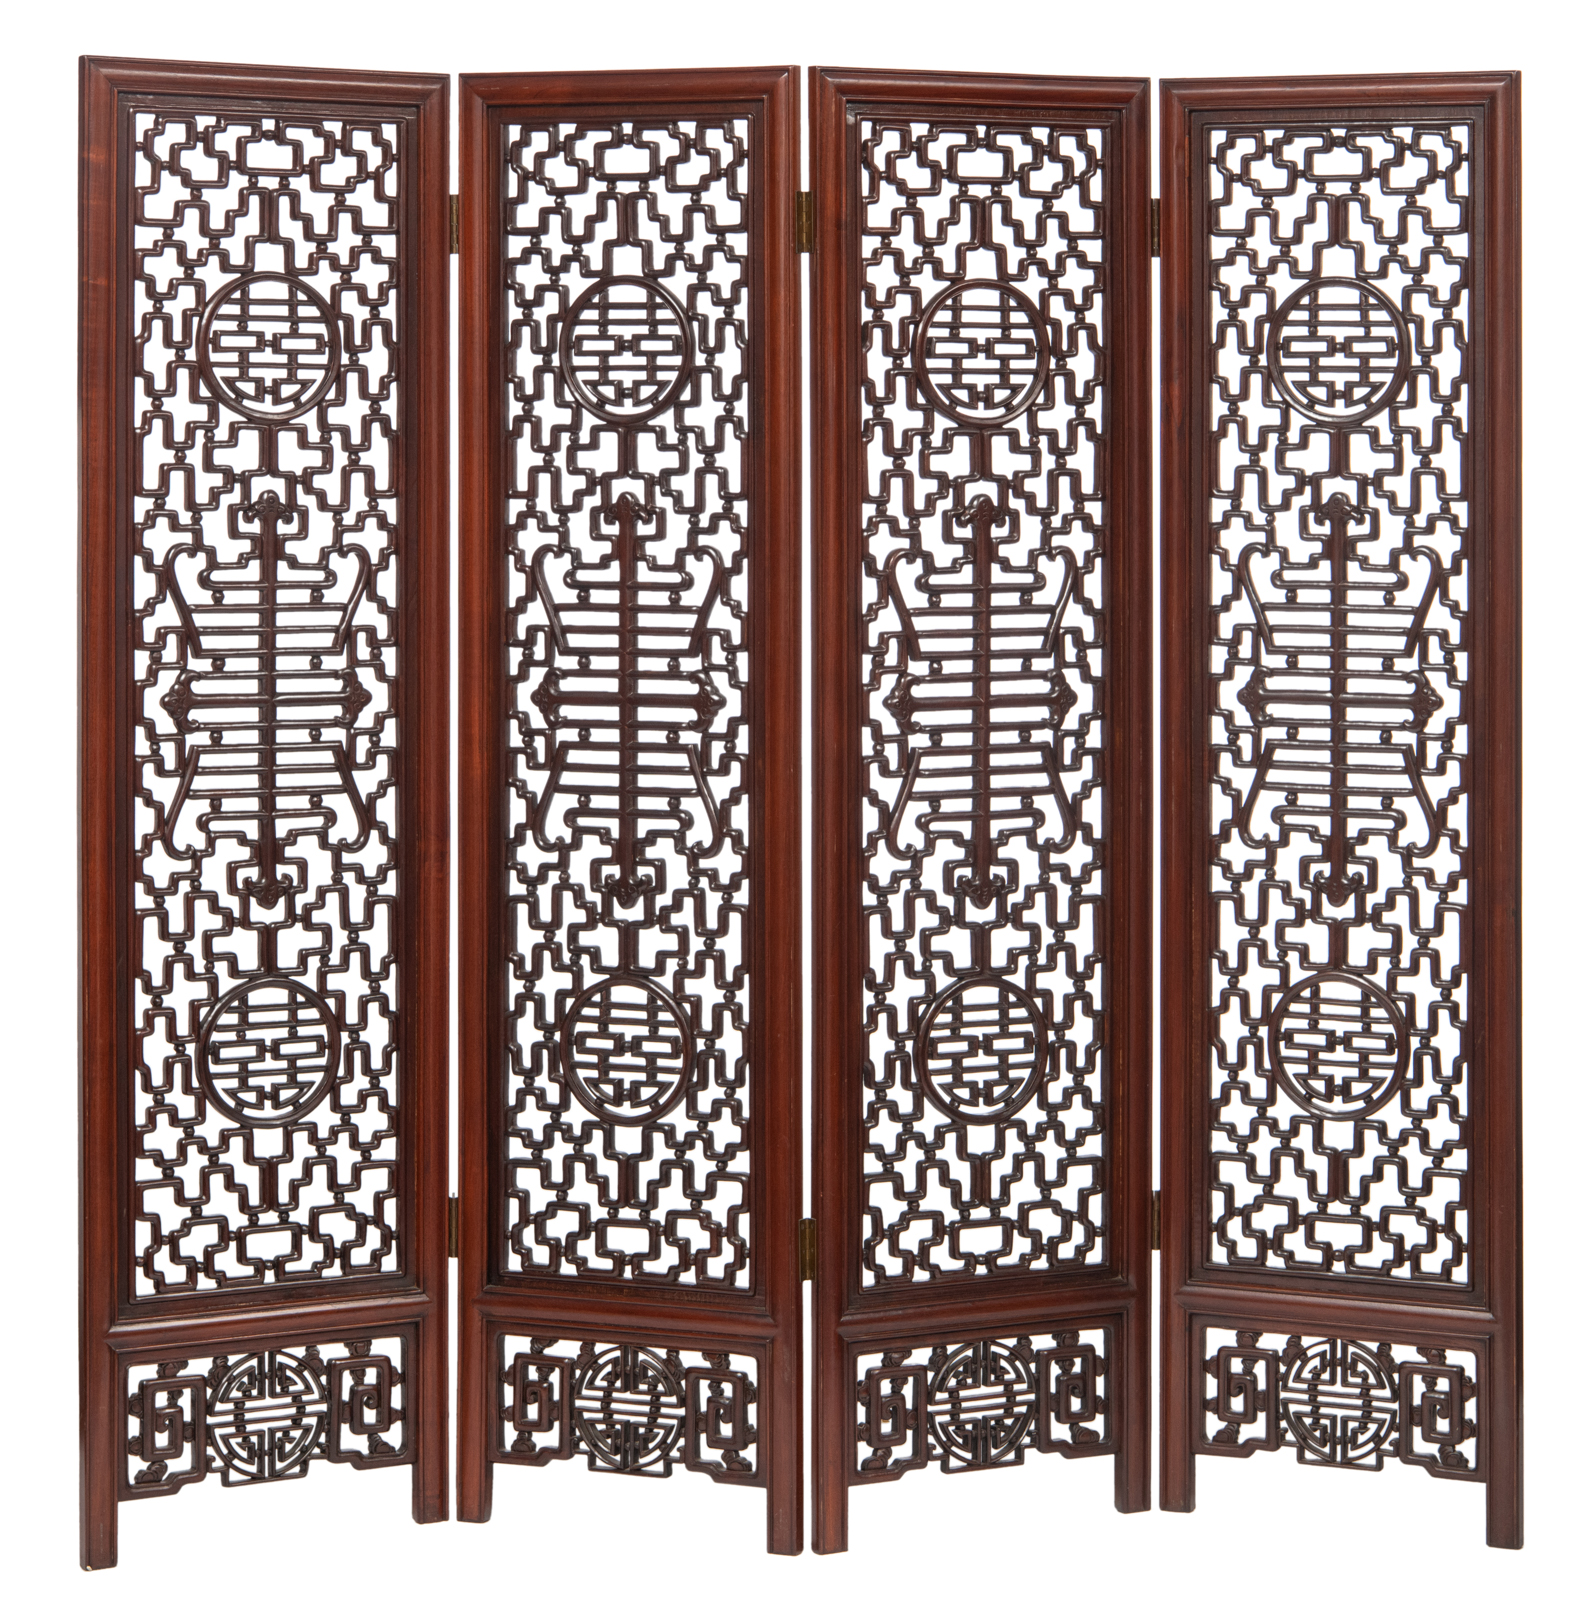 A Chinese rosewood four-panel screen, decorated with richly sculpted openwork ornaments, H 183 - W 4